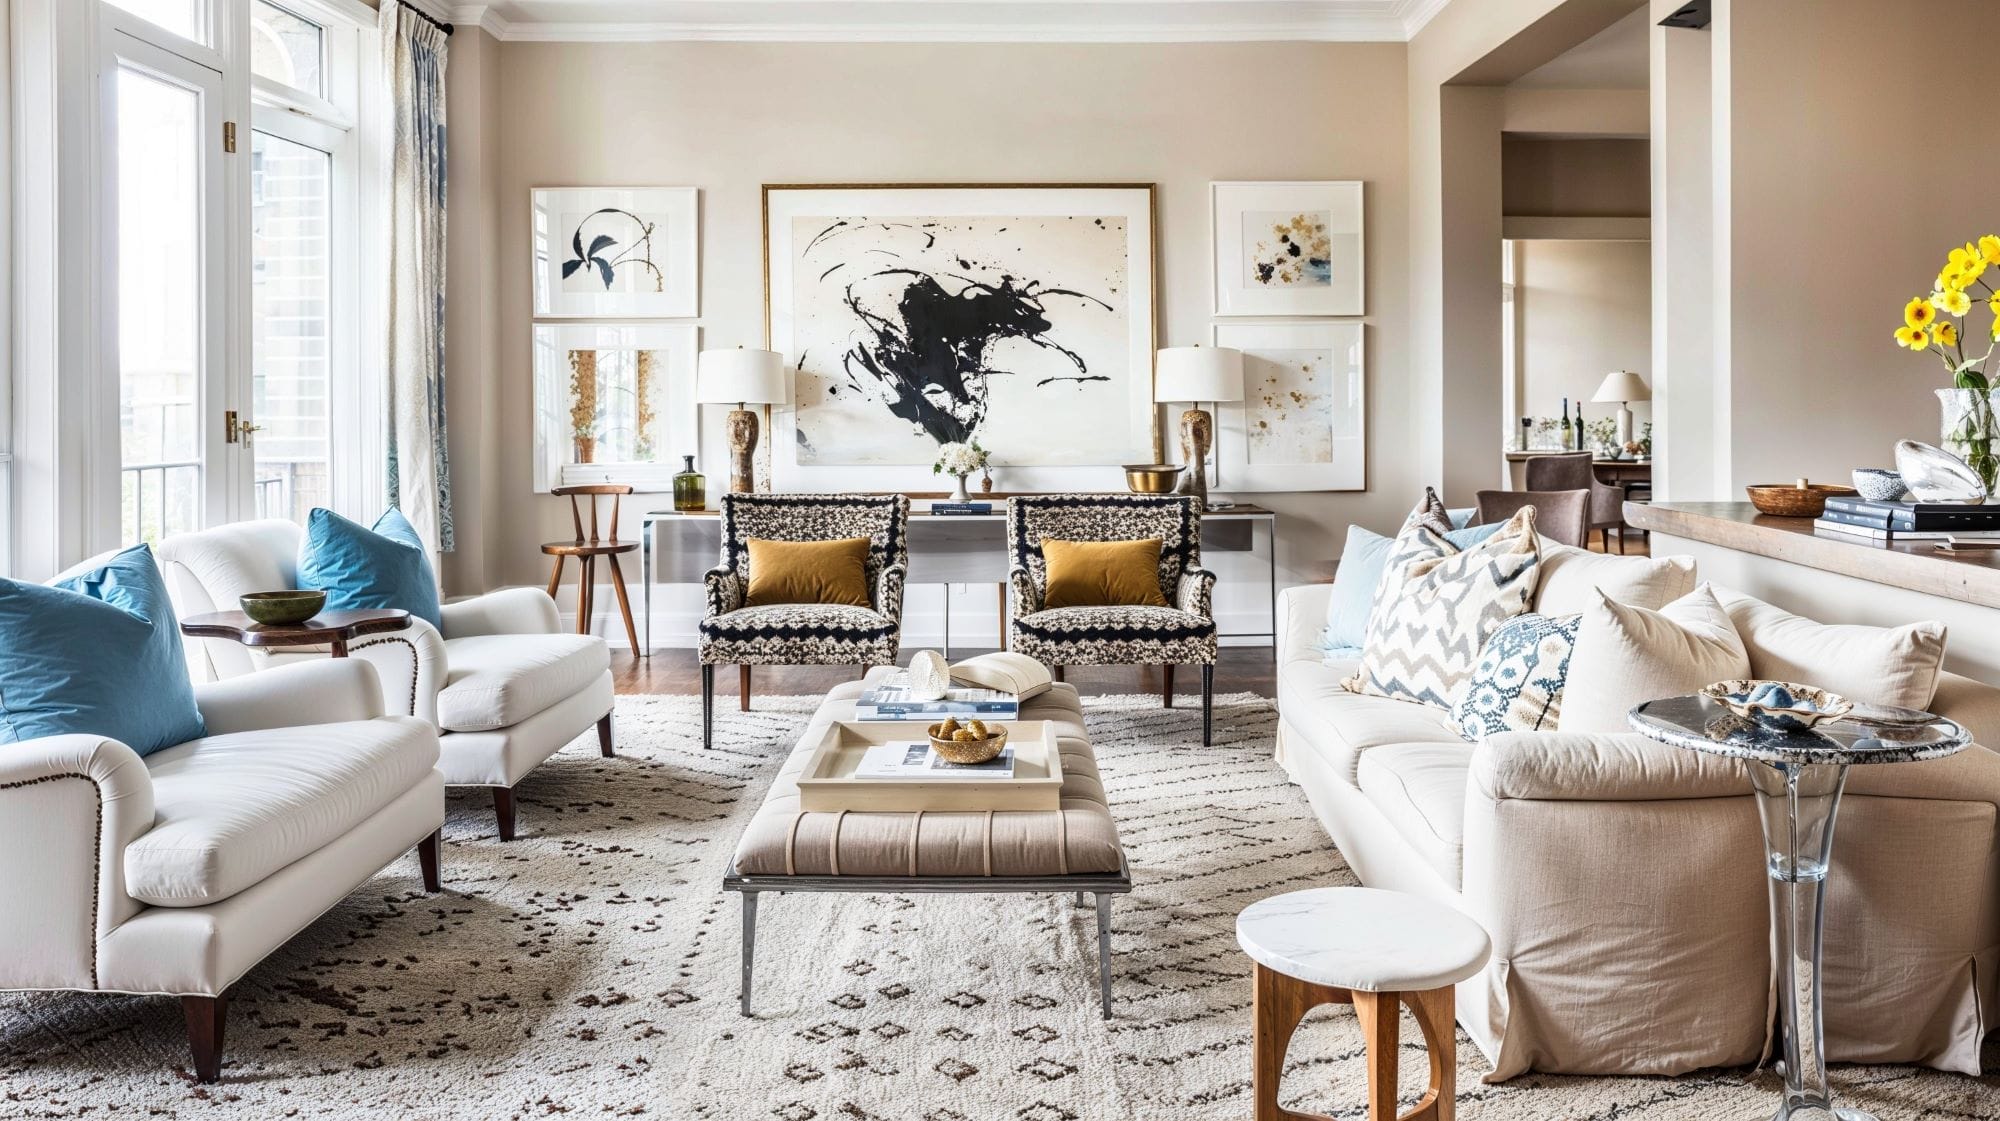 10 Interior Design Rules for Styling Your Home Like a Pro